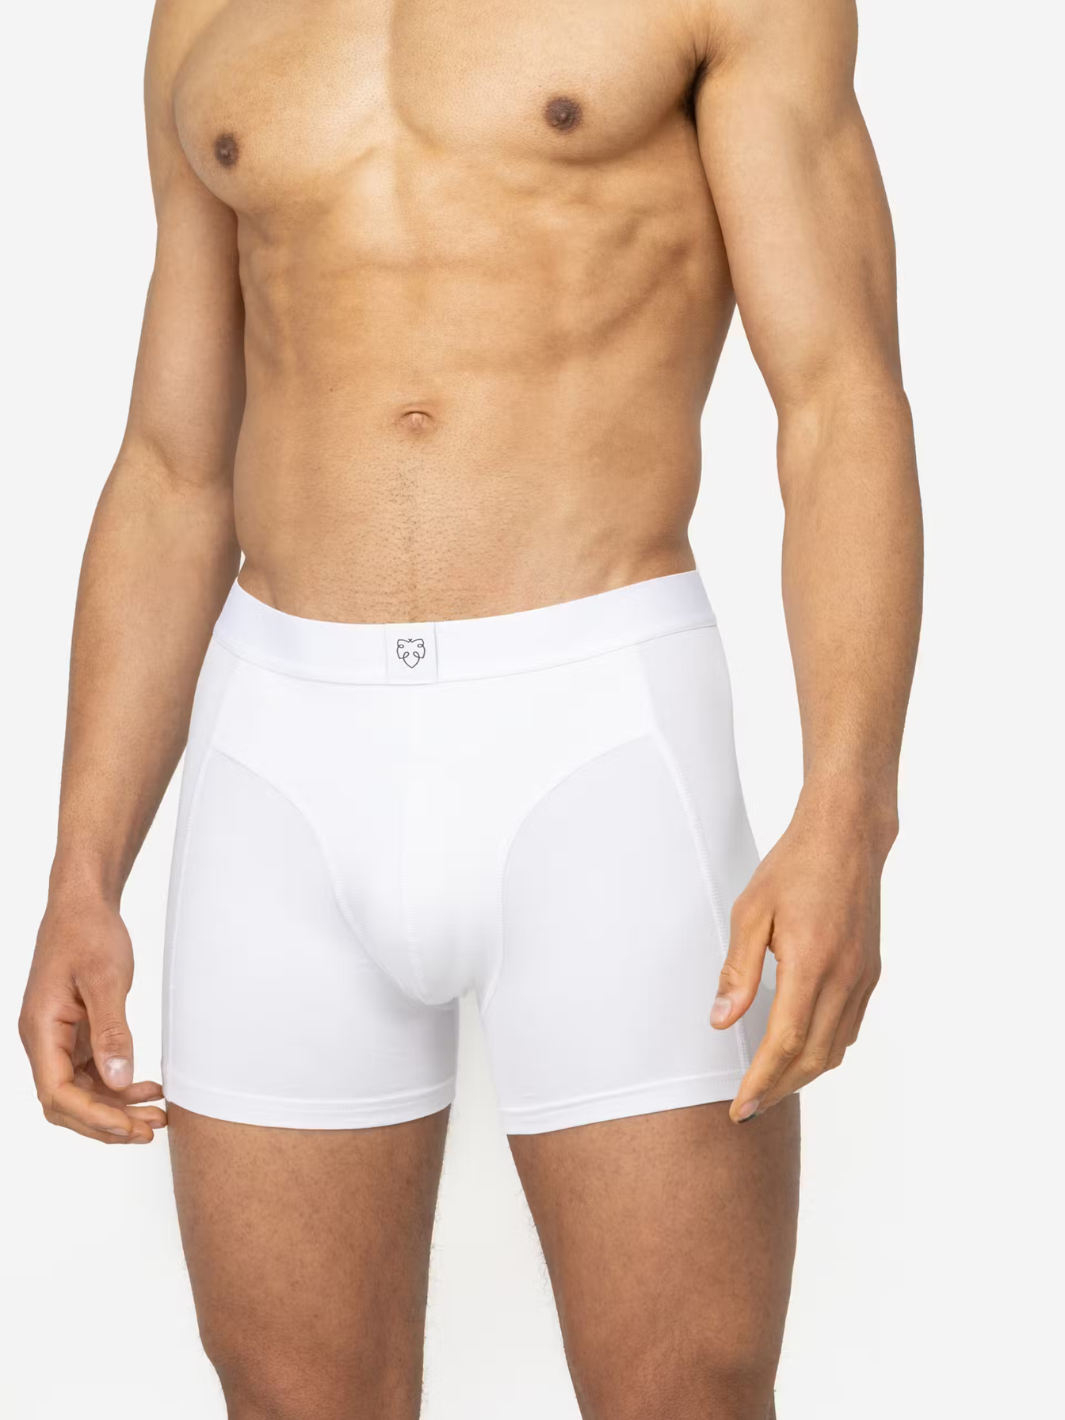 3 PACK - Men's boxer shorts made of organic cotton A-dam white